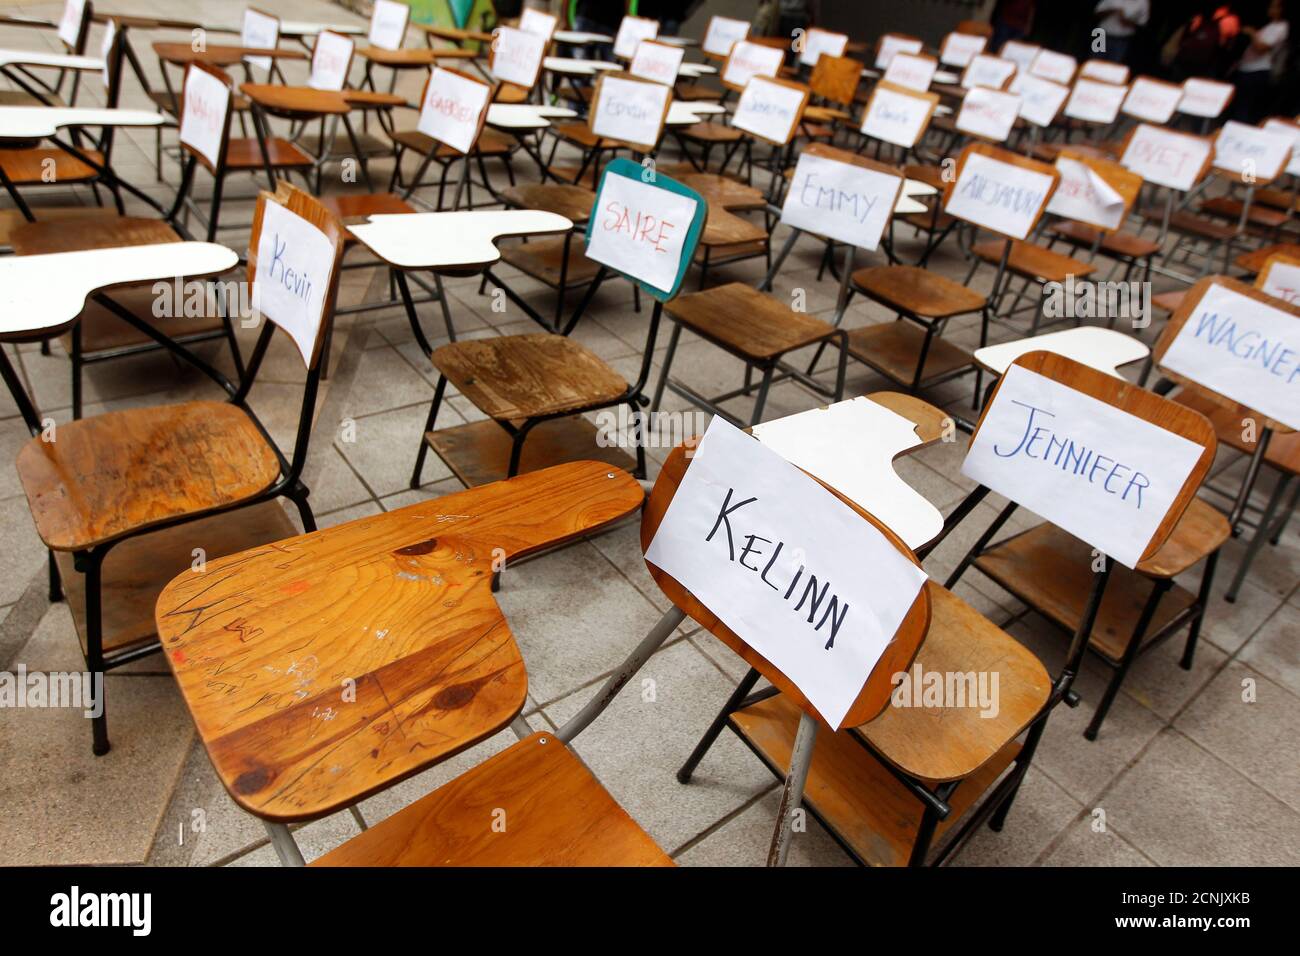 School Benches High Resolution Stock Photography And Images Alamy